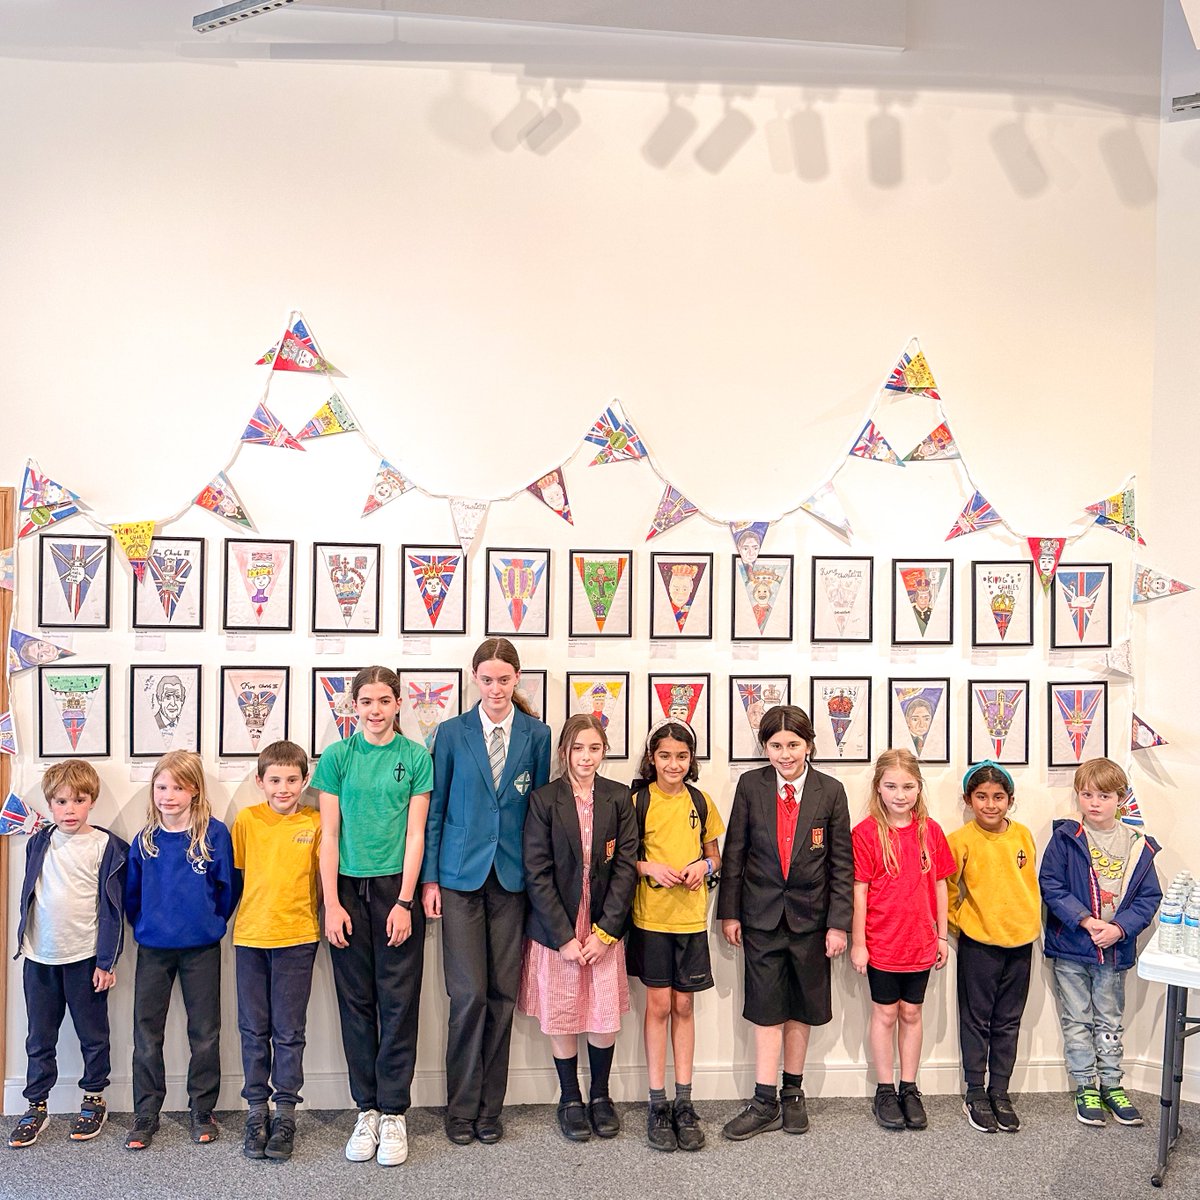 Last week we invited all the children who entered our Kings Coronation bunting competition to a special VIP opening. We were delighted to see their excitement and happiness from having their work on display. The exhibition is open today 6pm to 10pm. makeitealing.co.uk/kings-coronati…